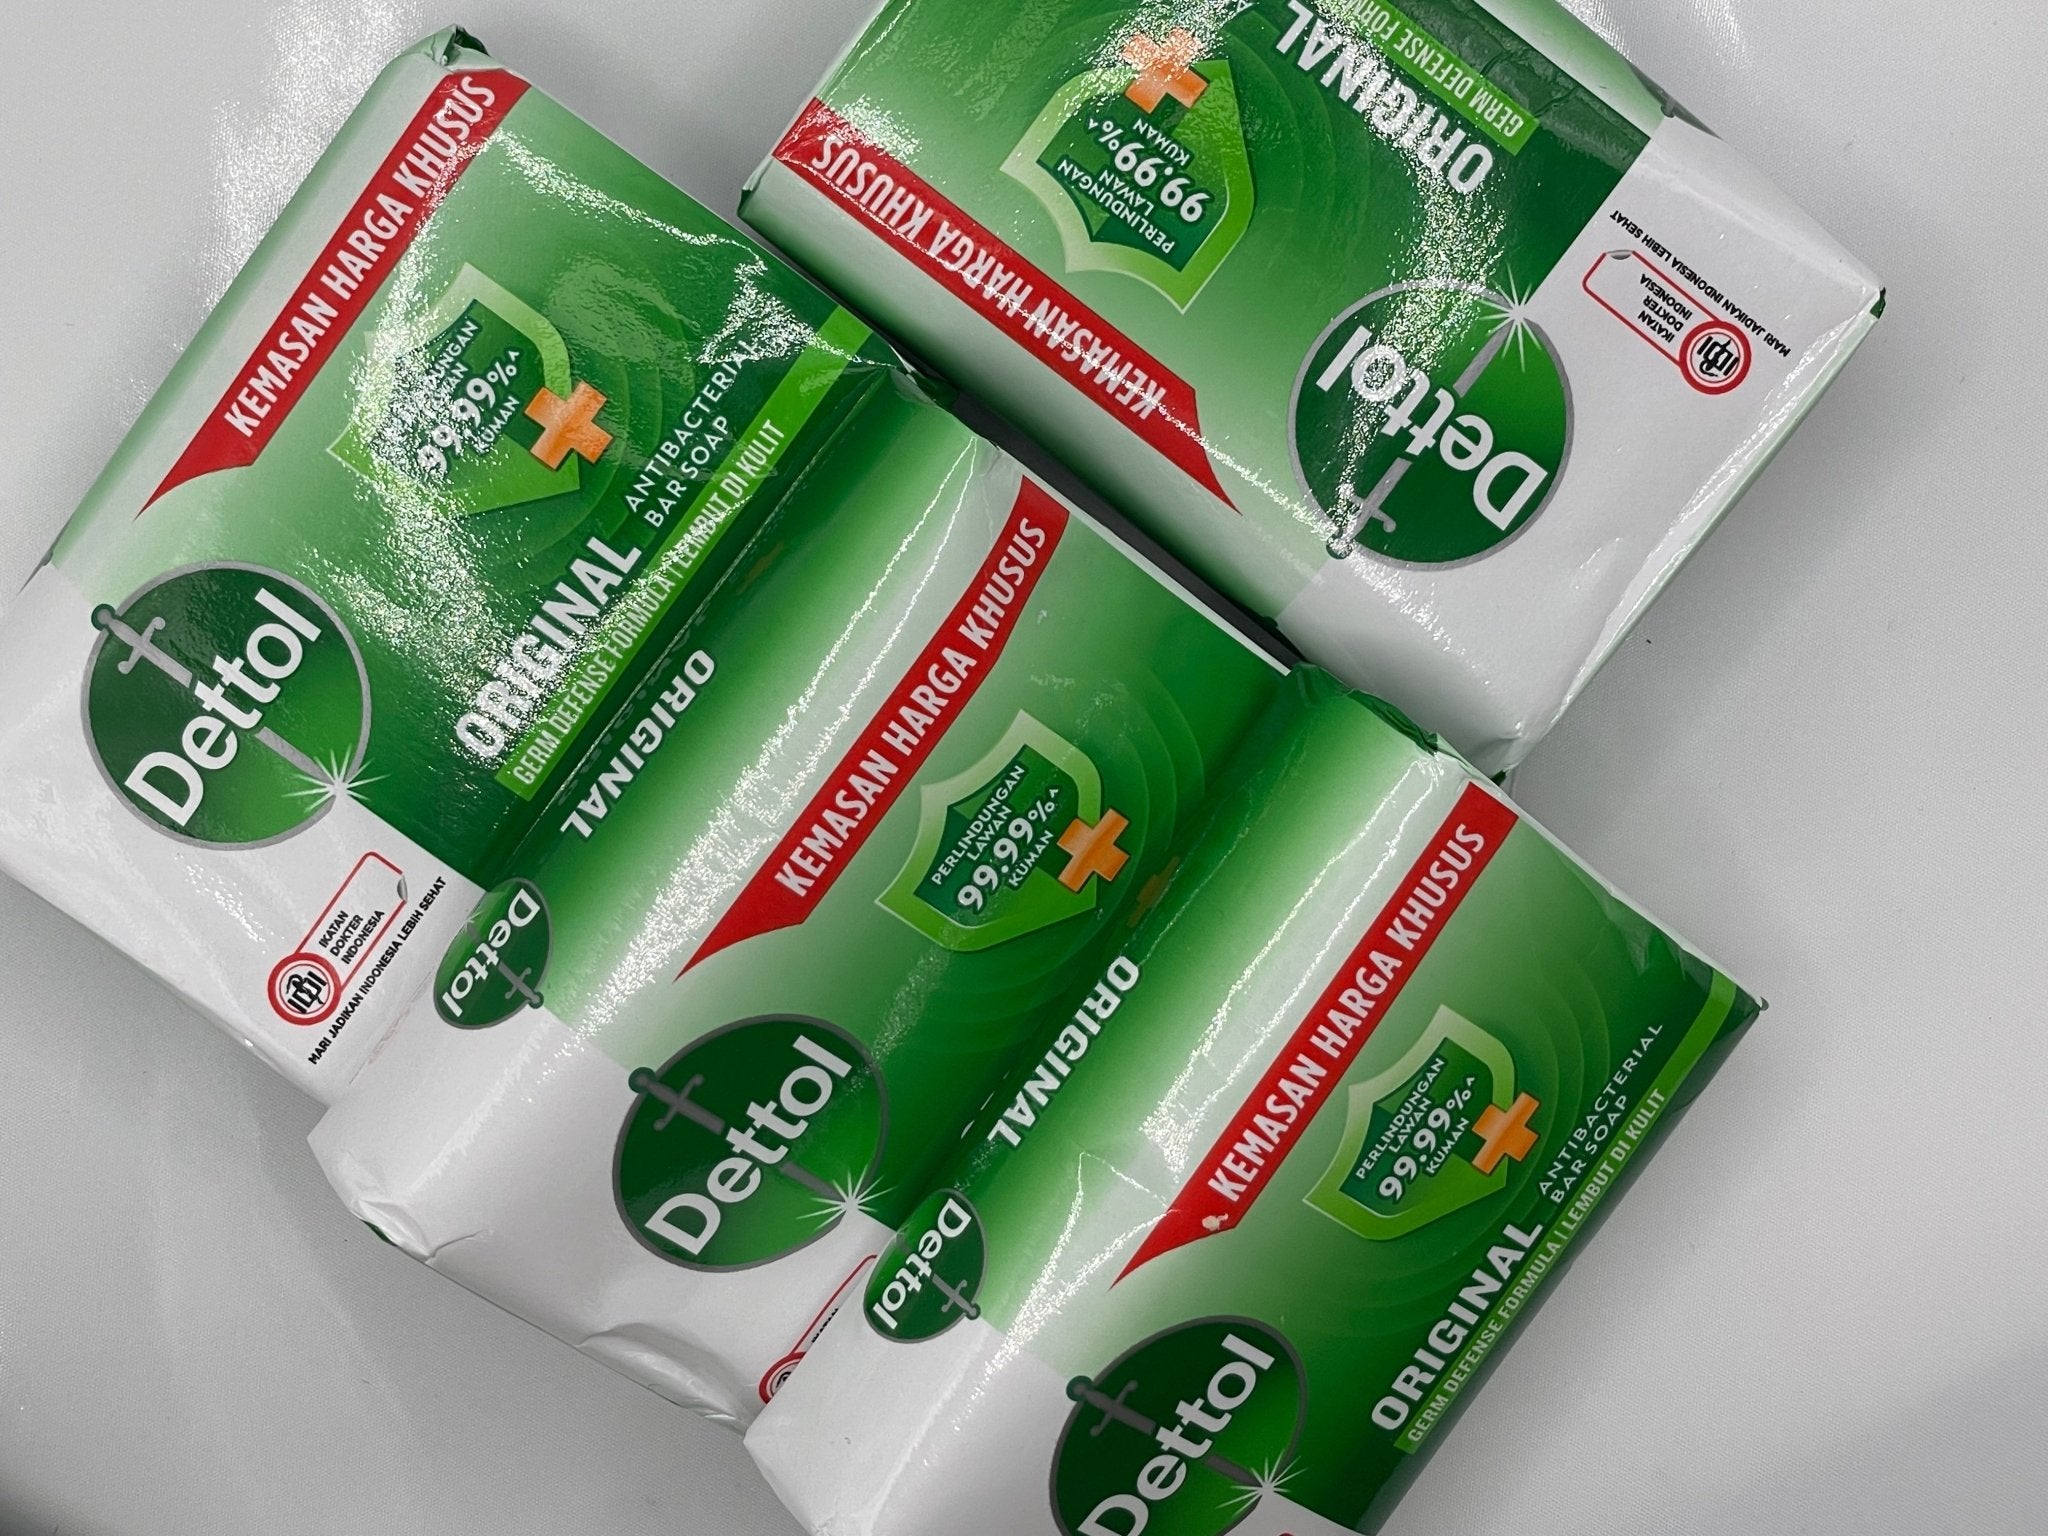 Dettol Soap - SMK African StoreSMK African Store#african_Caribbean_online_Groceries_store#